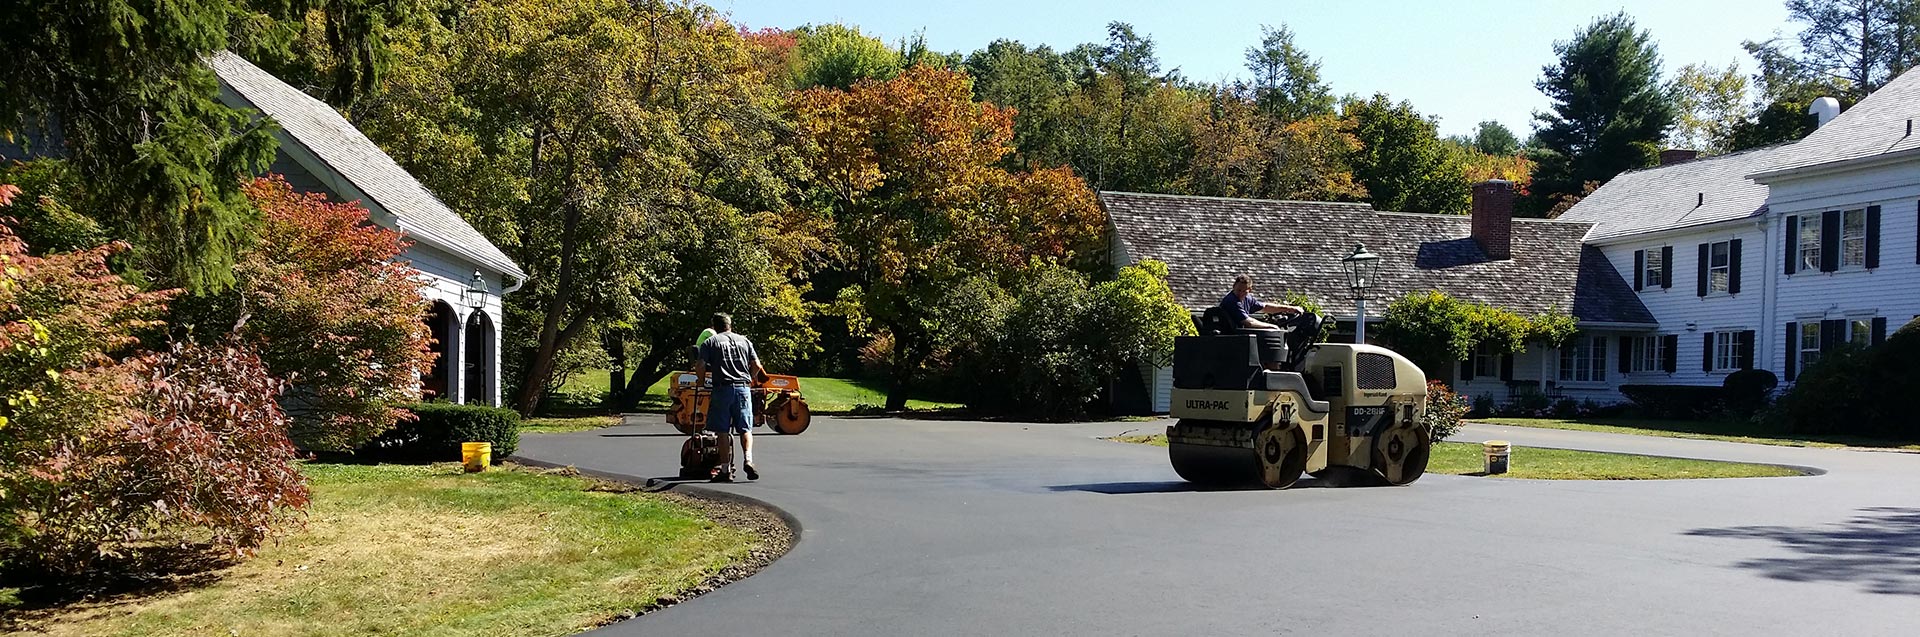 Krukoff Excavation and Paving, Inc., driveway repair and driveway paving in northeastern CT